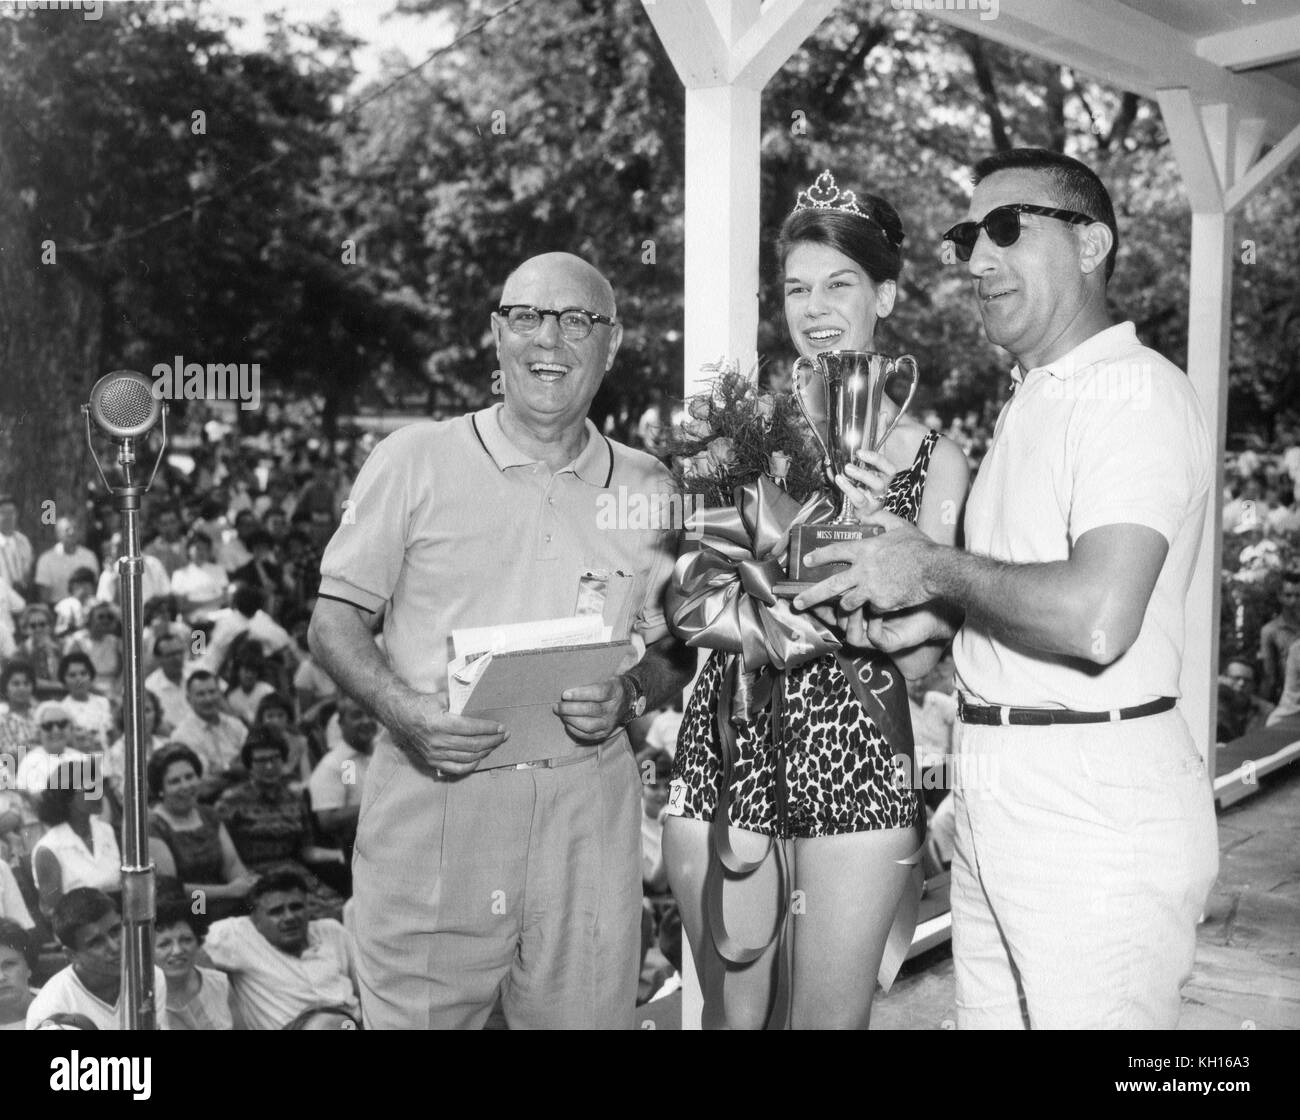 The unnamed winner of the Miss Interior Beauty Pageant (center) is presented with a bouquet and trophy by an unnamed man (left) and Secretary of the Interior Stewart Udall (right). July 28, 1962. Photo by Abbie Rowe. Stock Photo